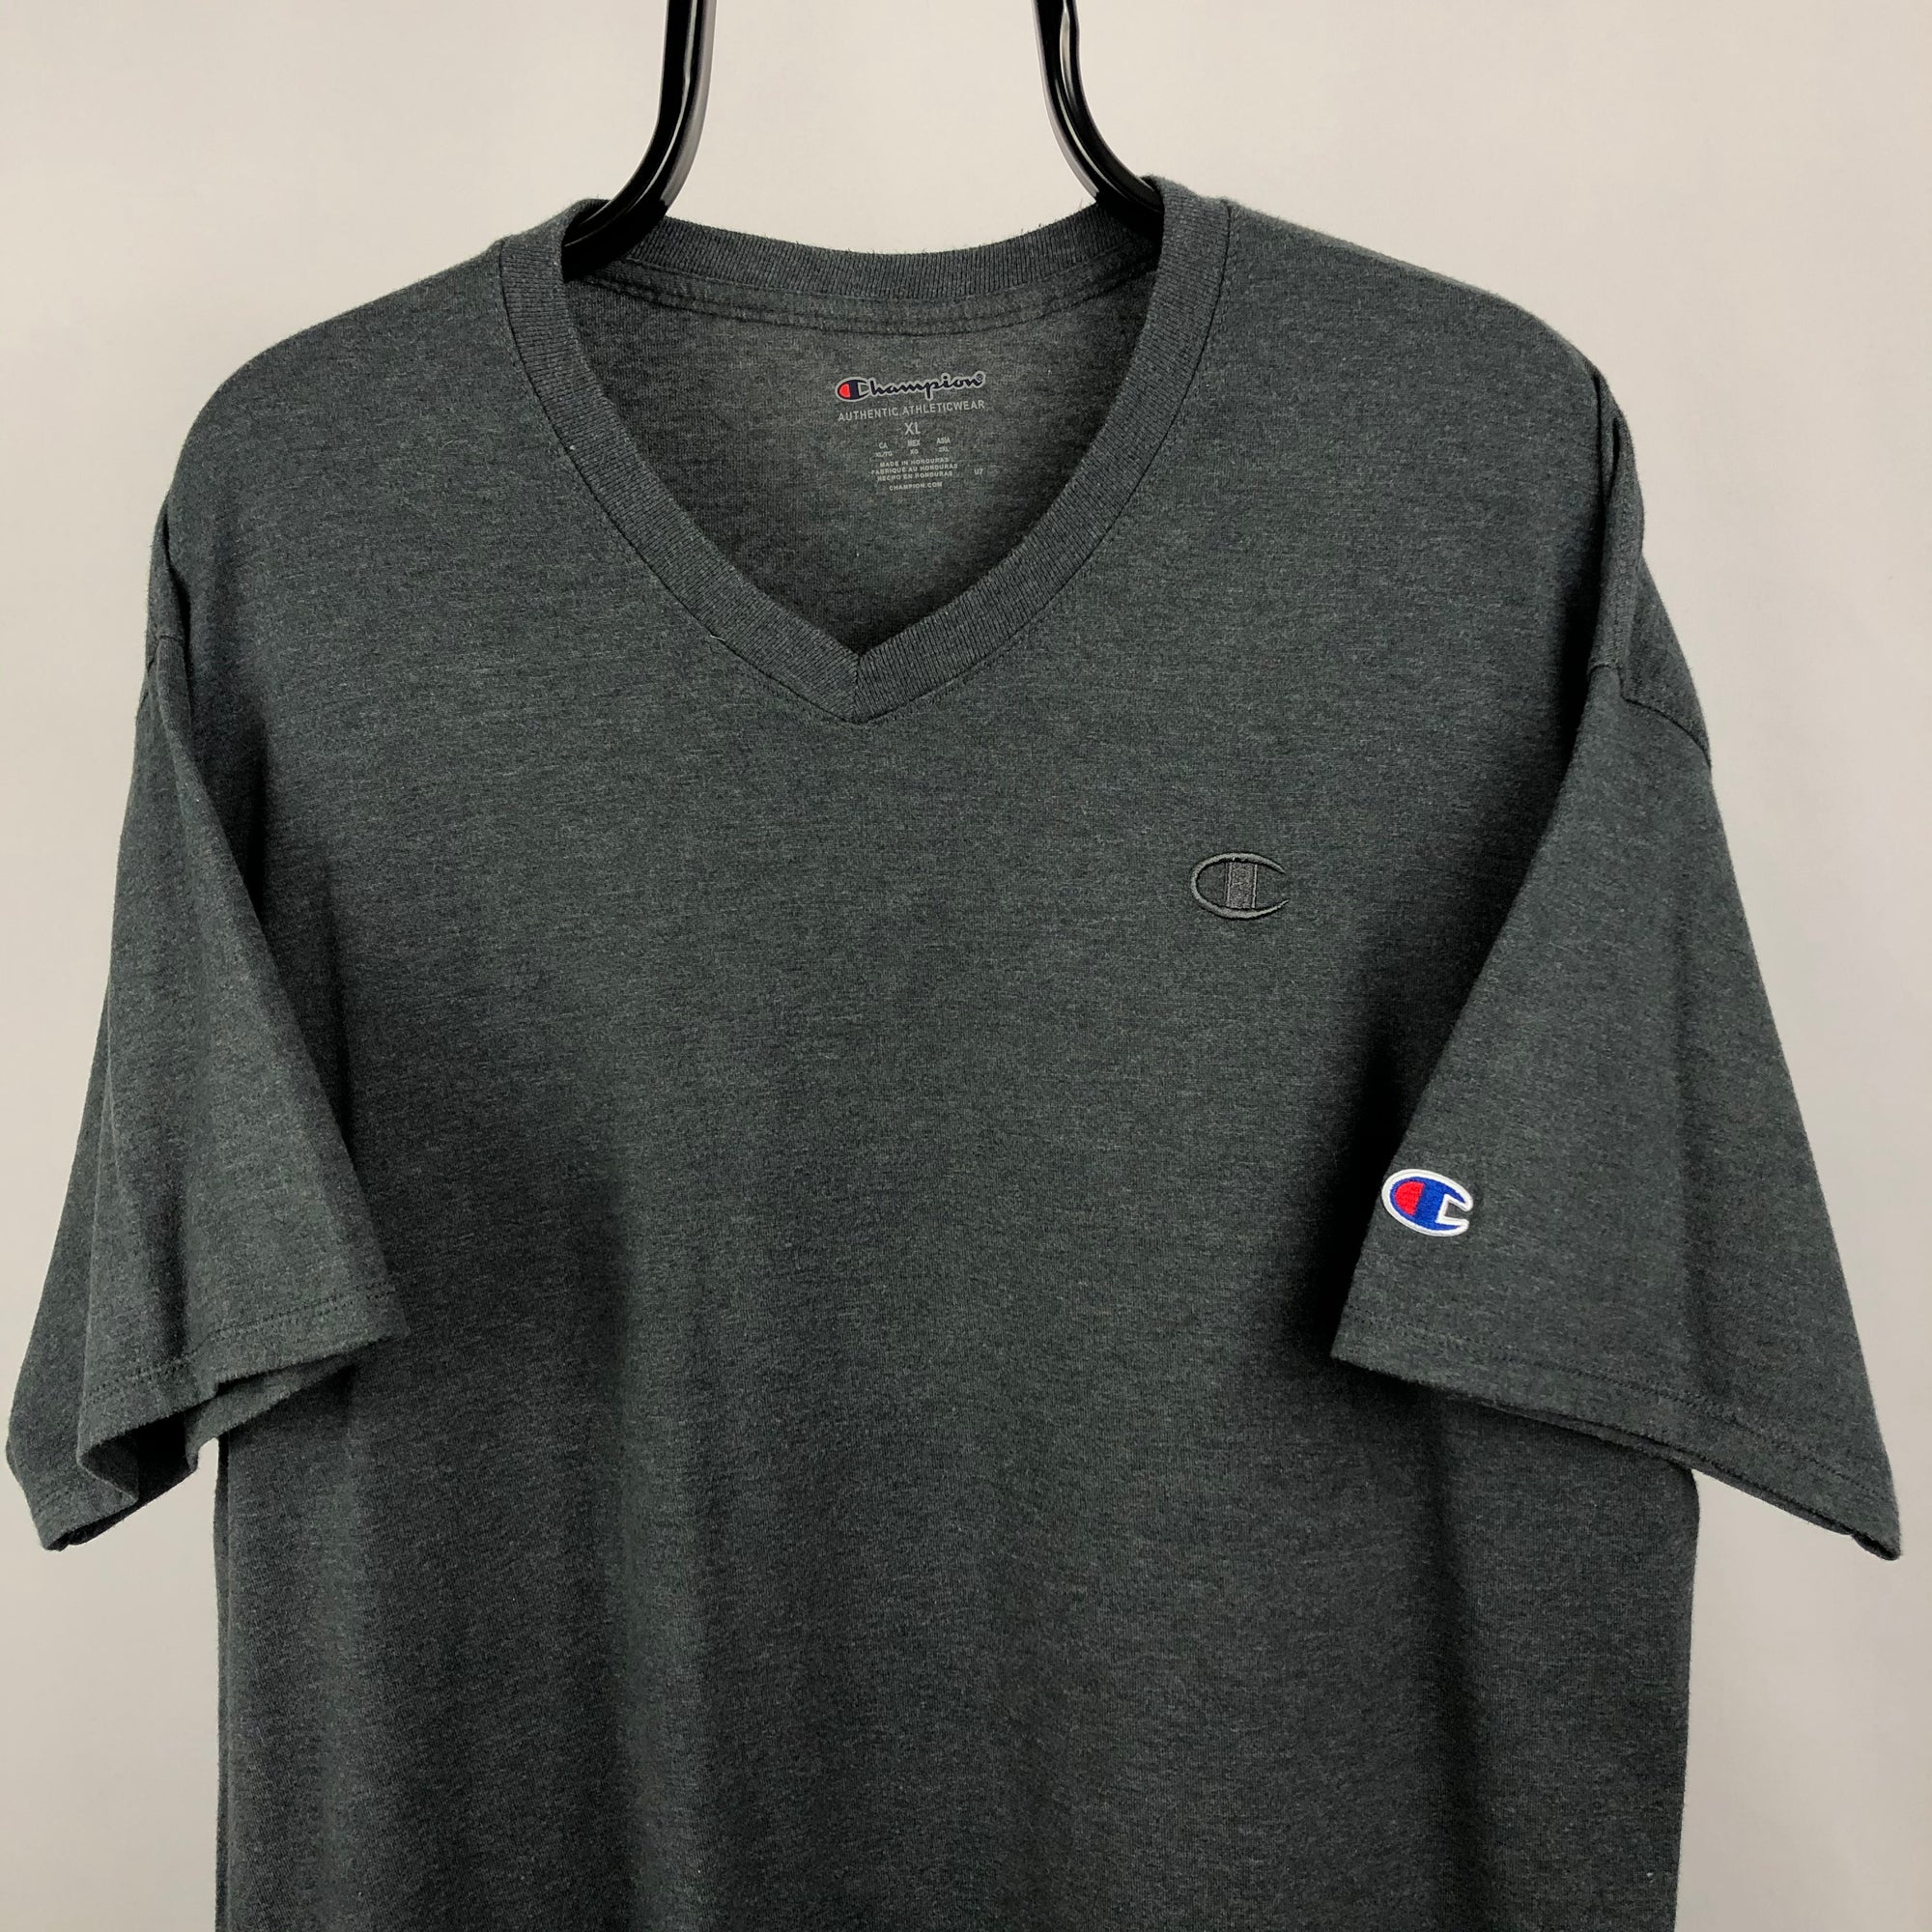 Champion Embroidered Small Logo Tee in Grey - Men's XL/Women's XXL